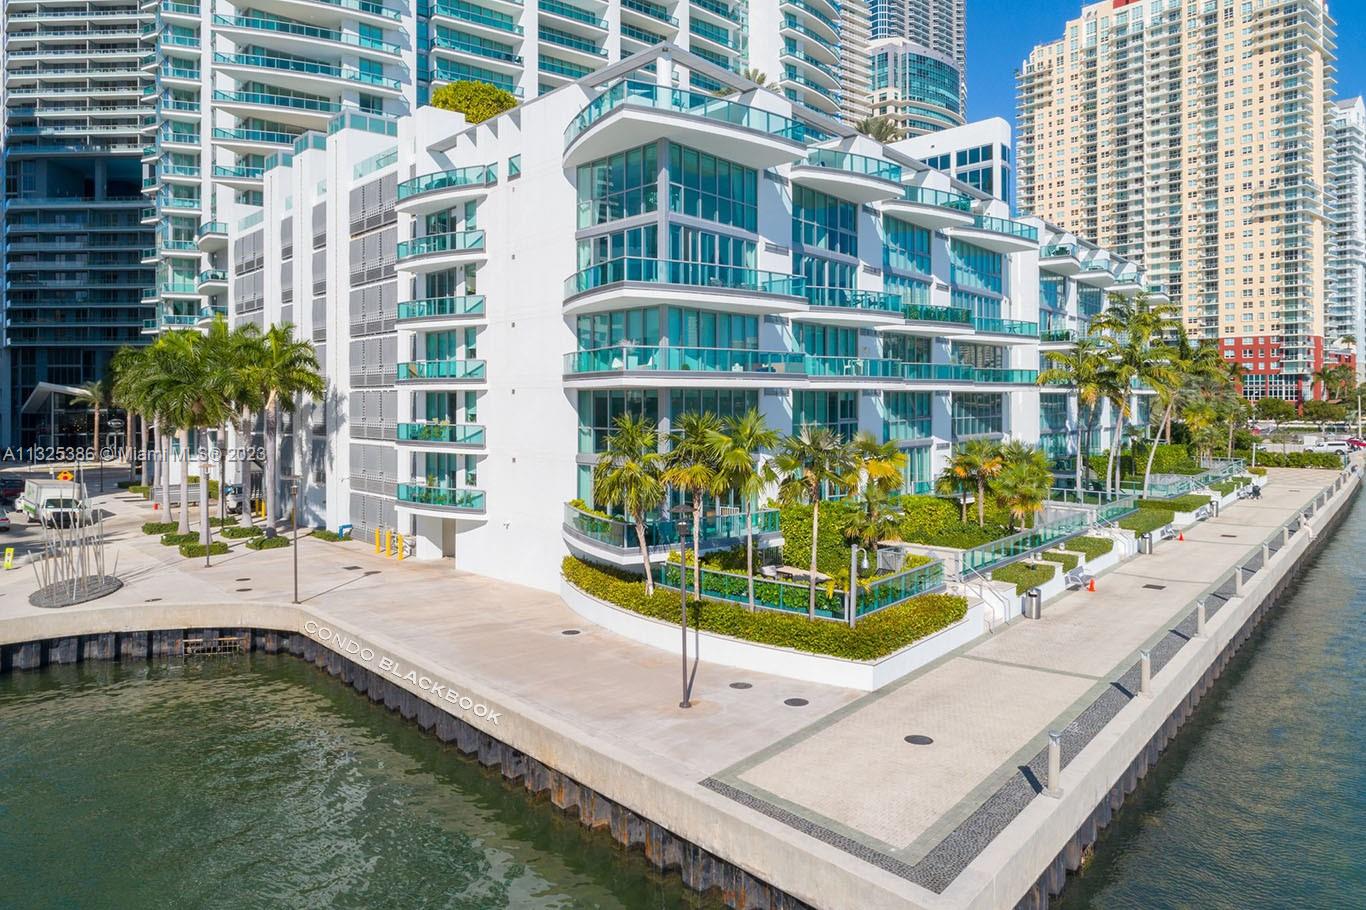 2BED/3BATH unit featuring a spacious Den converted into a Room with closet and direct access to the bathroom, Jade at Brickell condos are surrounded by water and provide beautiful unobstructed views while taking a relaxing walk contemplating the sunset or an early morning jog around the walking path. Jade at Brickell condo living is tranquil, scenic and convenient.If you are buying or looking to rent a condo in Jade at Brickell you are in the right place. You won't find a website with a more comprehensive and well-presented summary of all the Jade at Brickell condos and real estate property details.  One of the great pleasures of Jade at Brickell is your constant proximity to water, situated on a complex line of coast cut up by tributaries, a series of causeways link the city together.